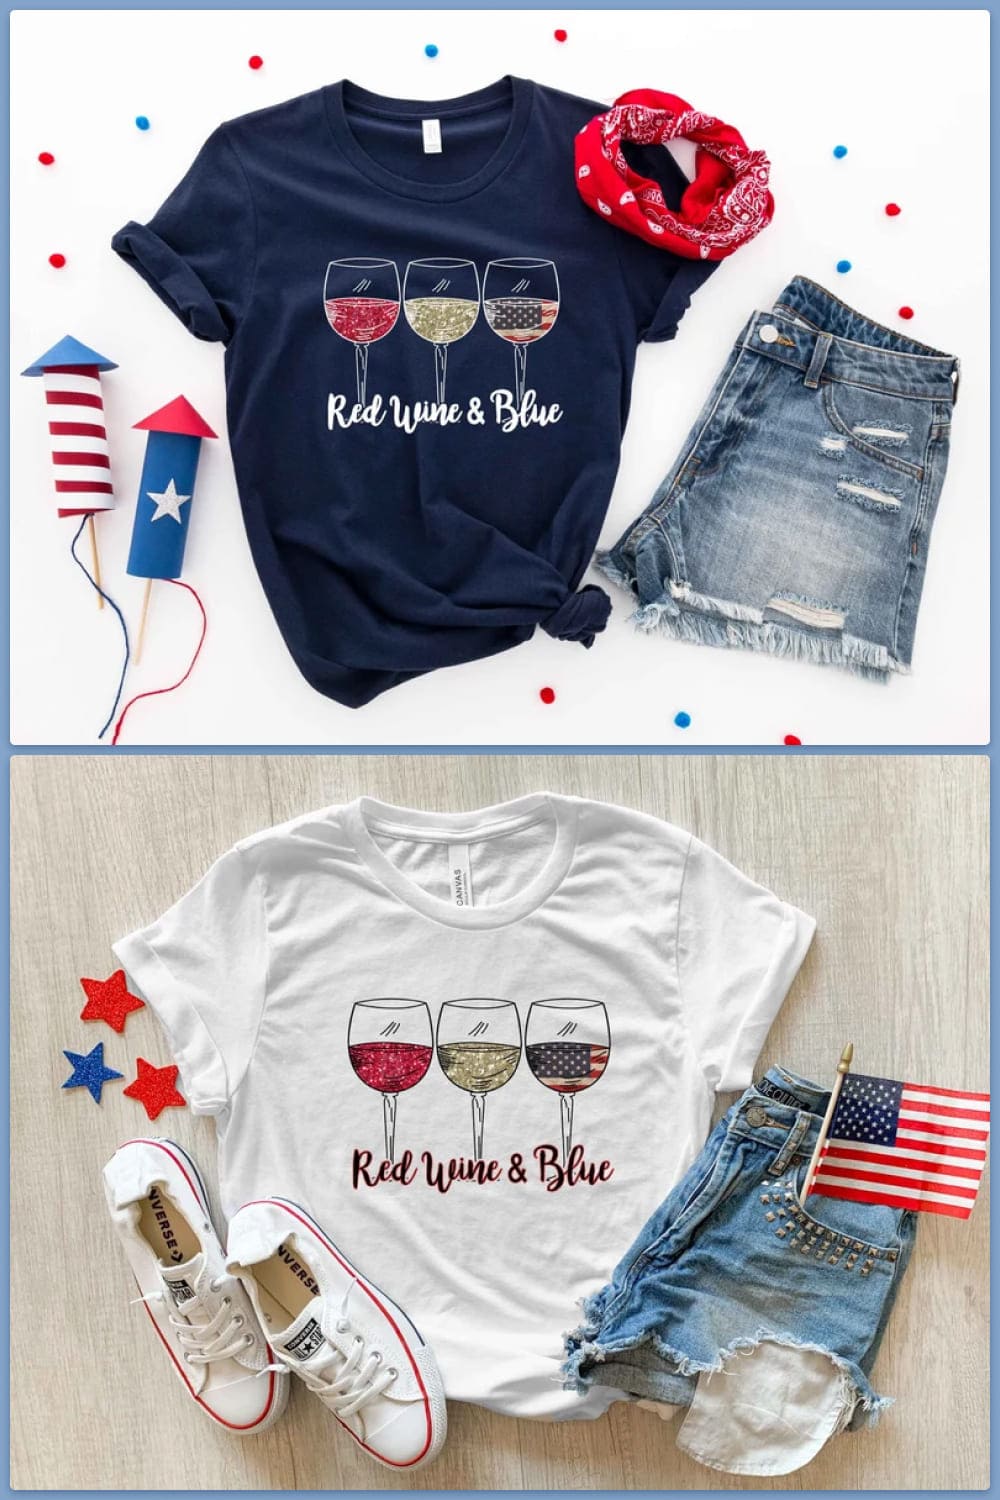 Clothing sets with glasses of wine on t-shirts.